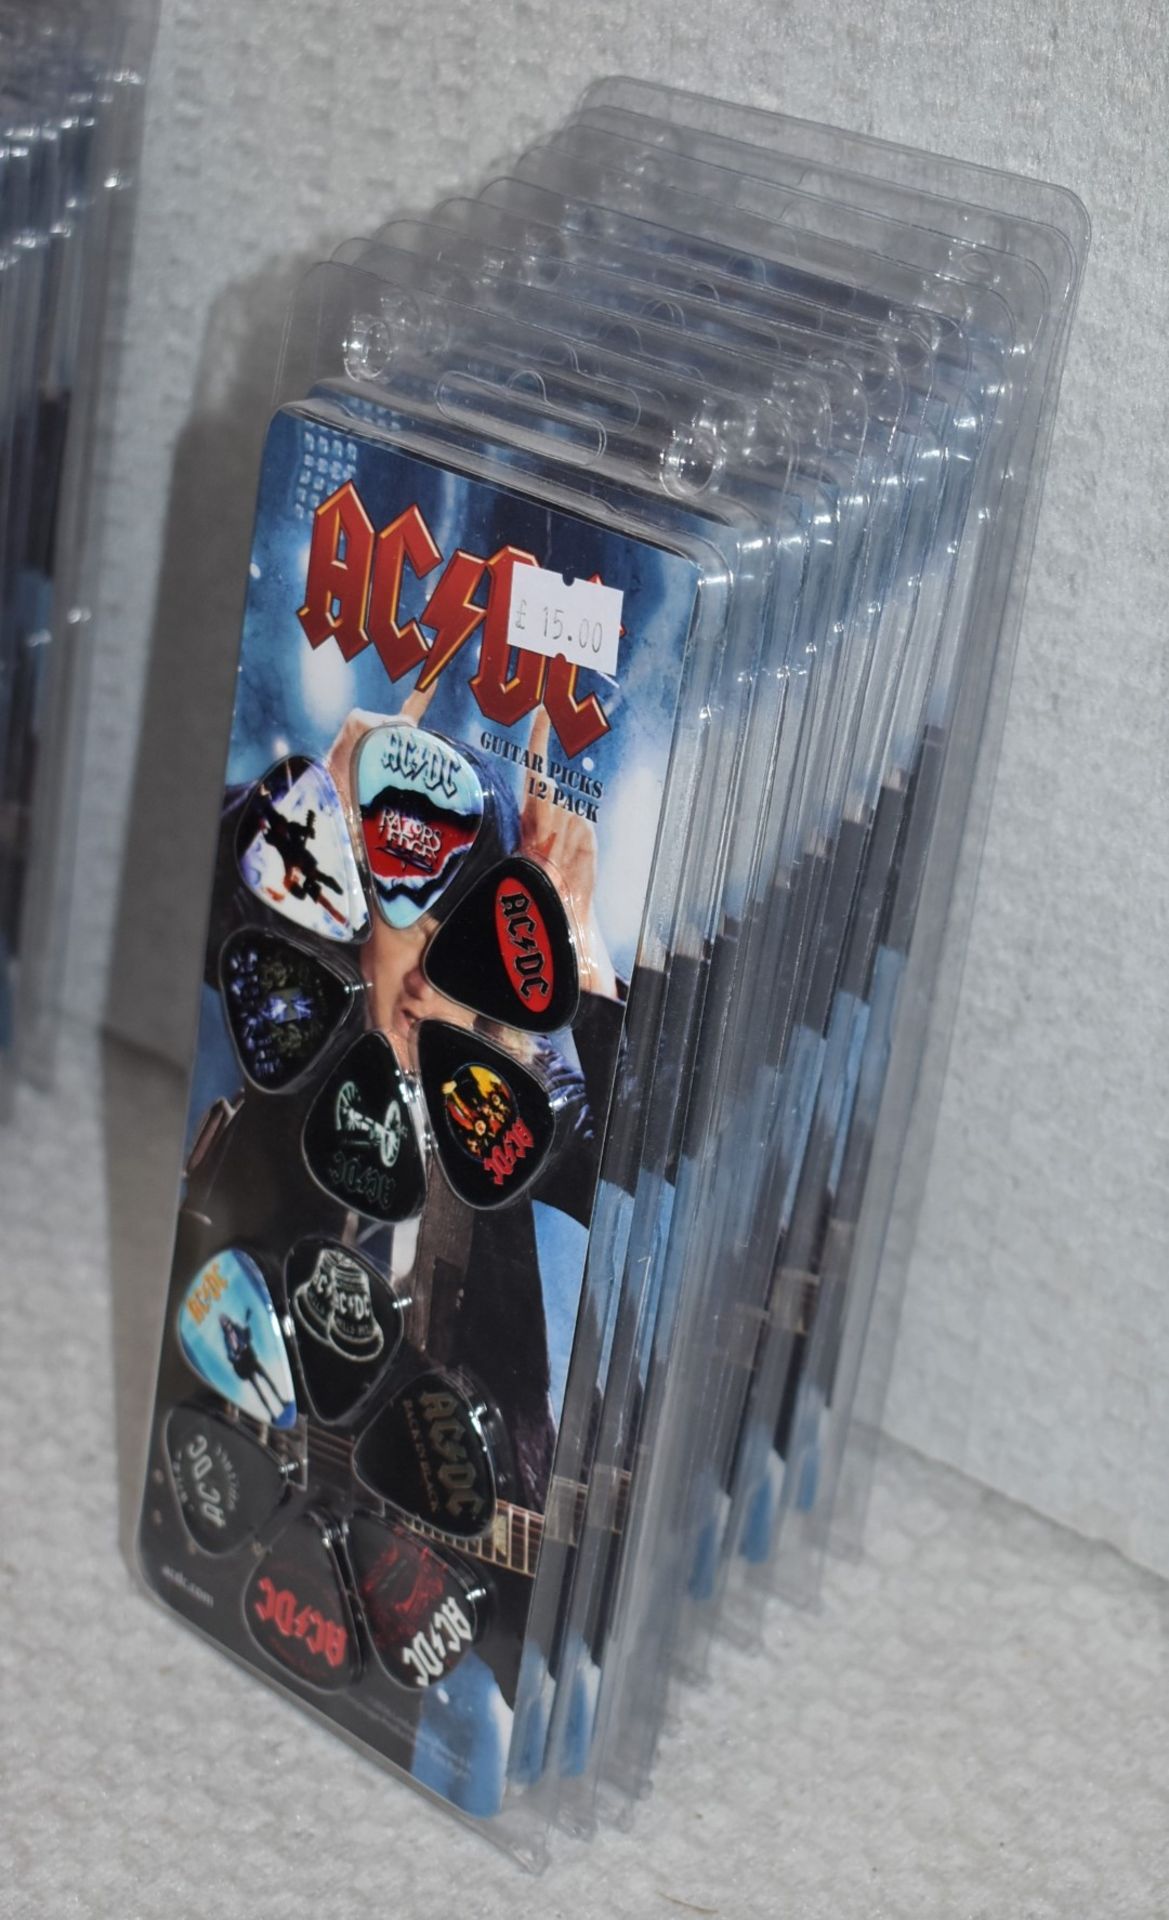 10 x ACDC Guitar Pick Multipacks By Perri's - 6 Picks Per Pack - Officially Licensed Merchandise - - Image 2 of 8